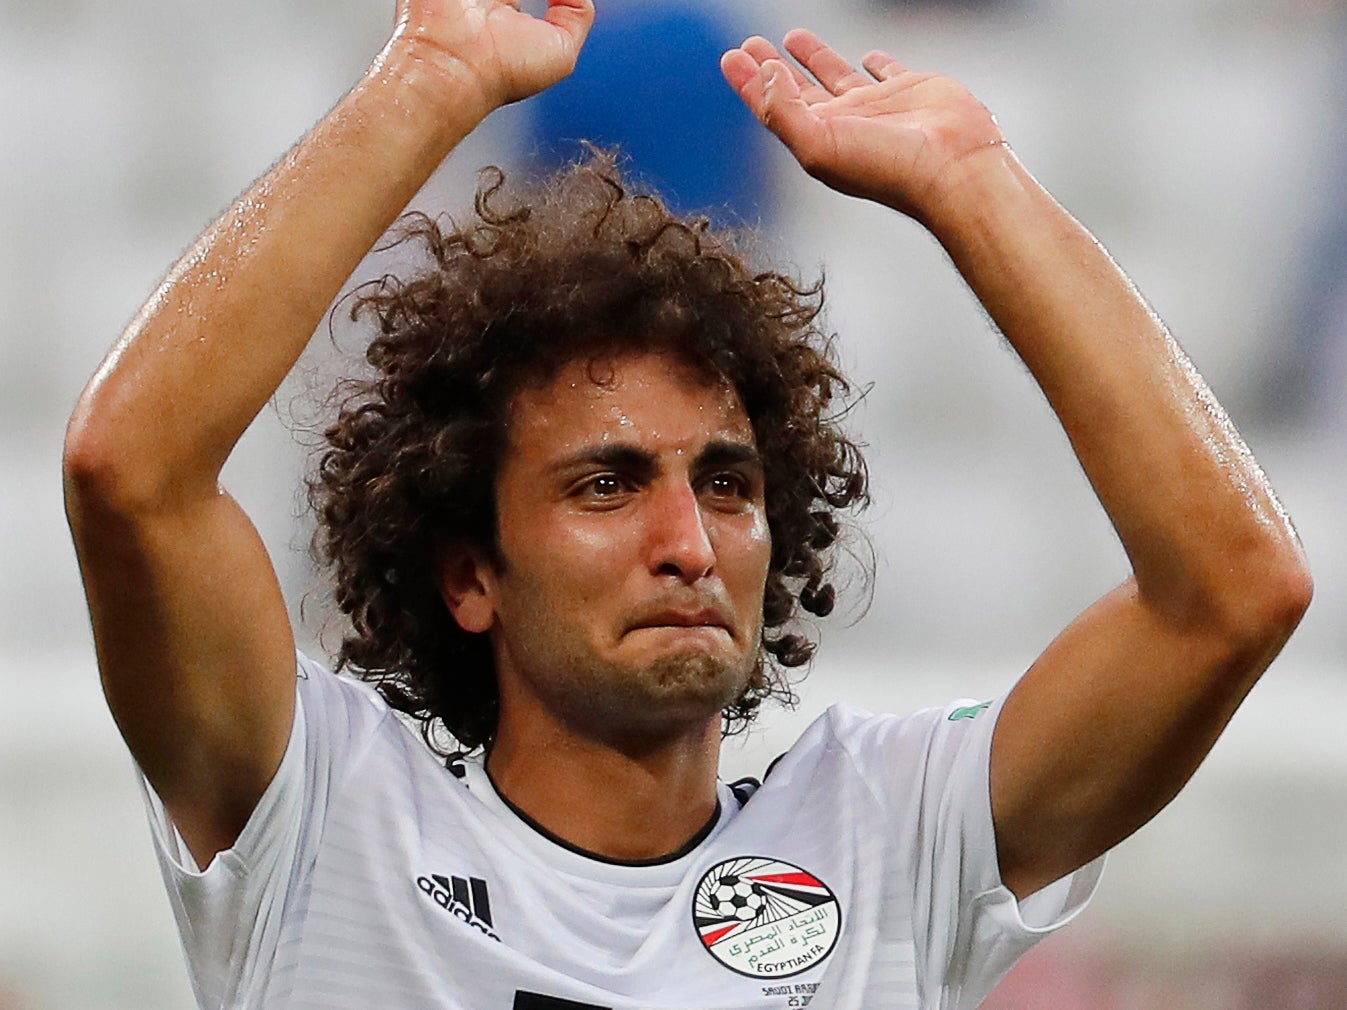 The Egyptian Football Federation confirmed Warda had been expelled from the squad